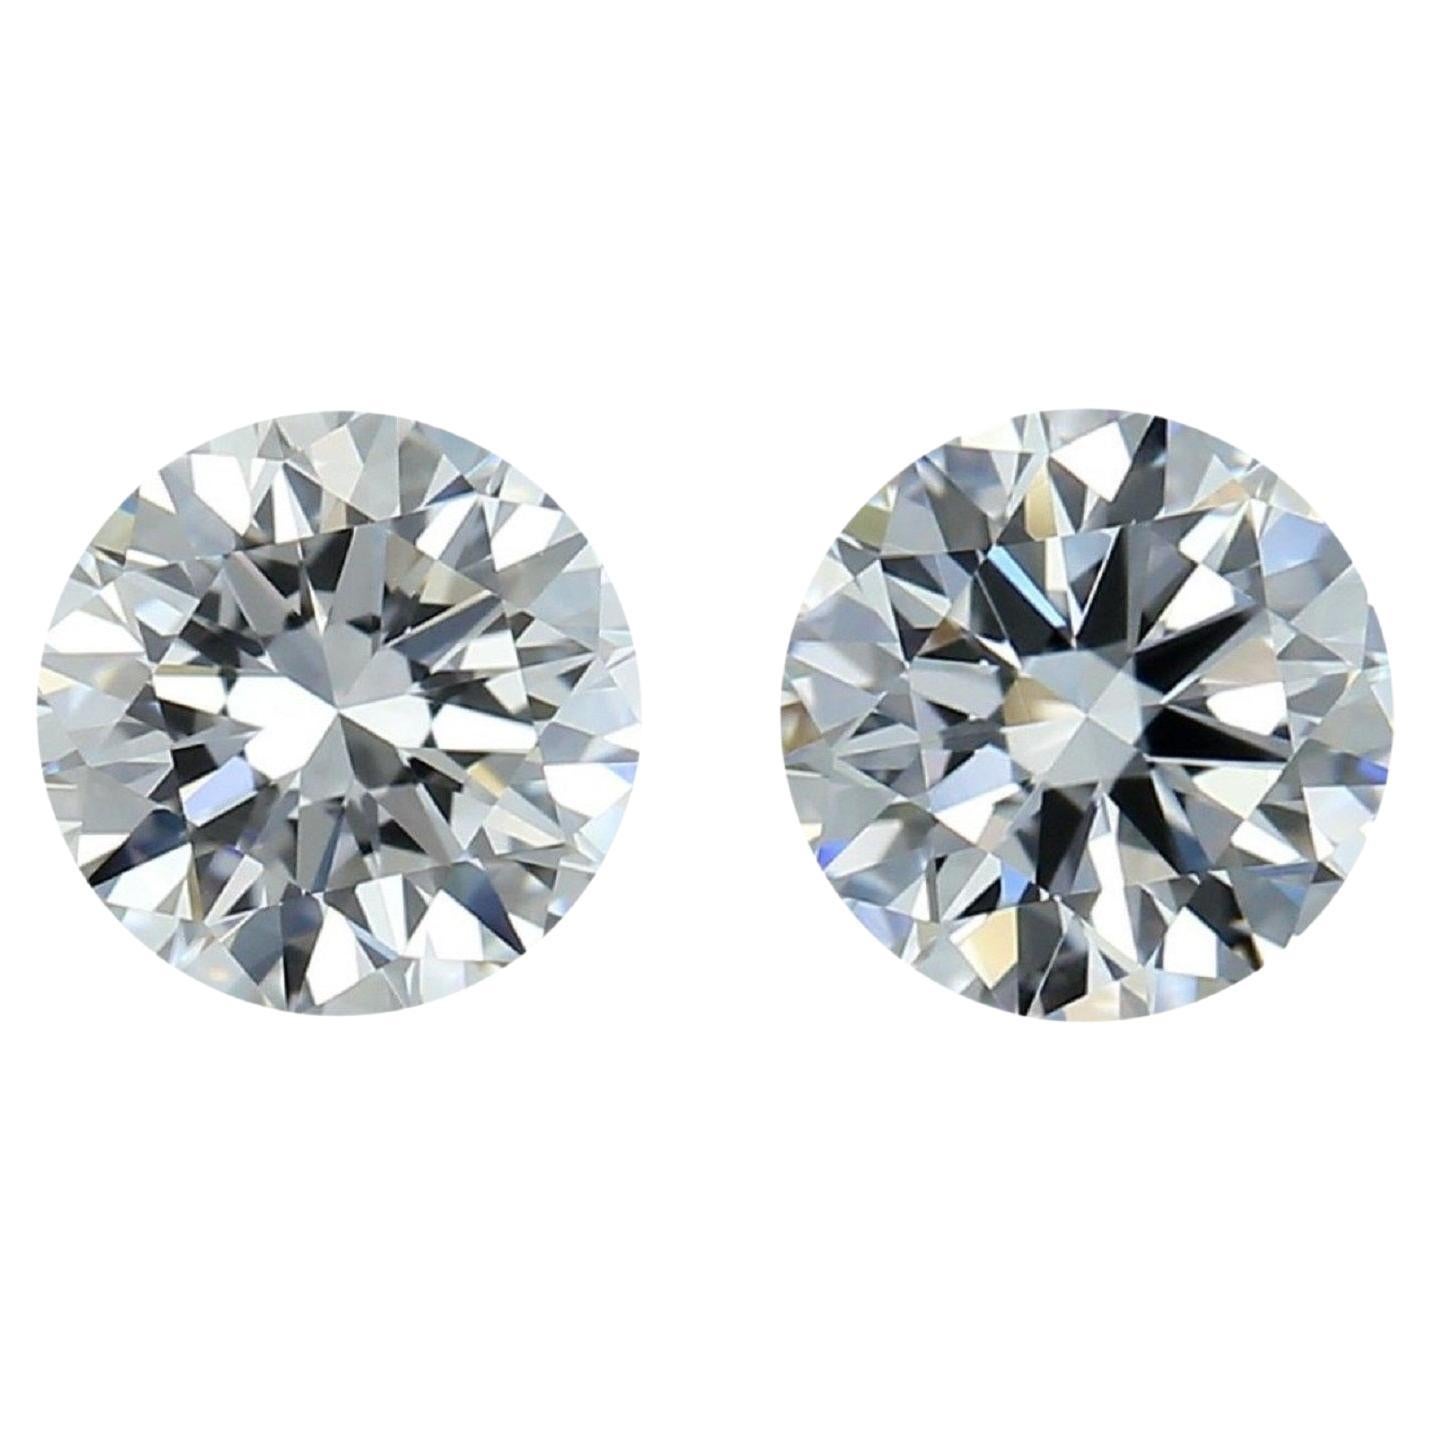 Sparking 2 Pcs Flawless Natural Diamonds with 2.0 Ct Round D IF IGI Certificate